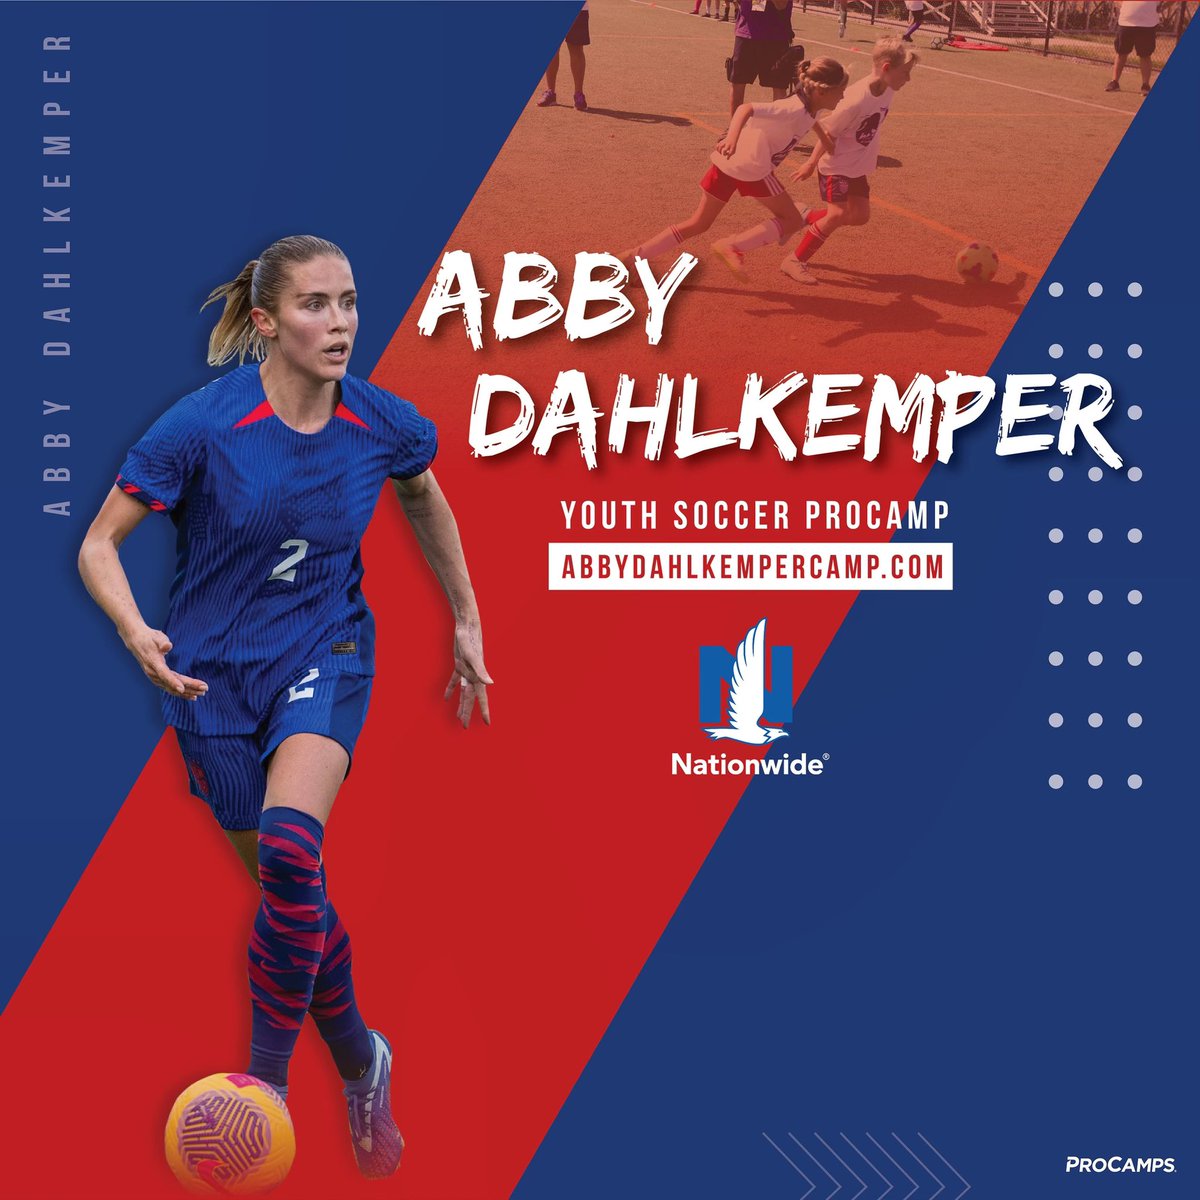 We’re just over two weeks away from my Soccer @ProCamps!   Start the New Year off strong 💪 and let's get better TOGETHER! A limited number of spots are still available. Visit AbbyDahlkemperCamp.com to register.